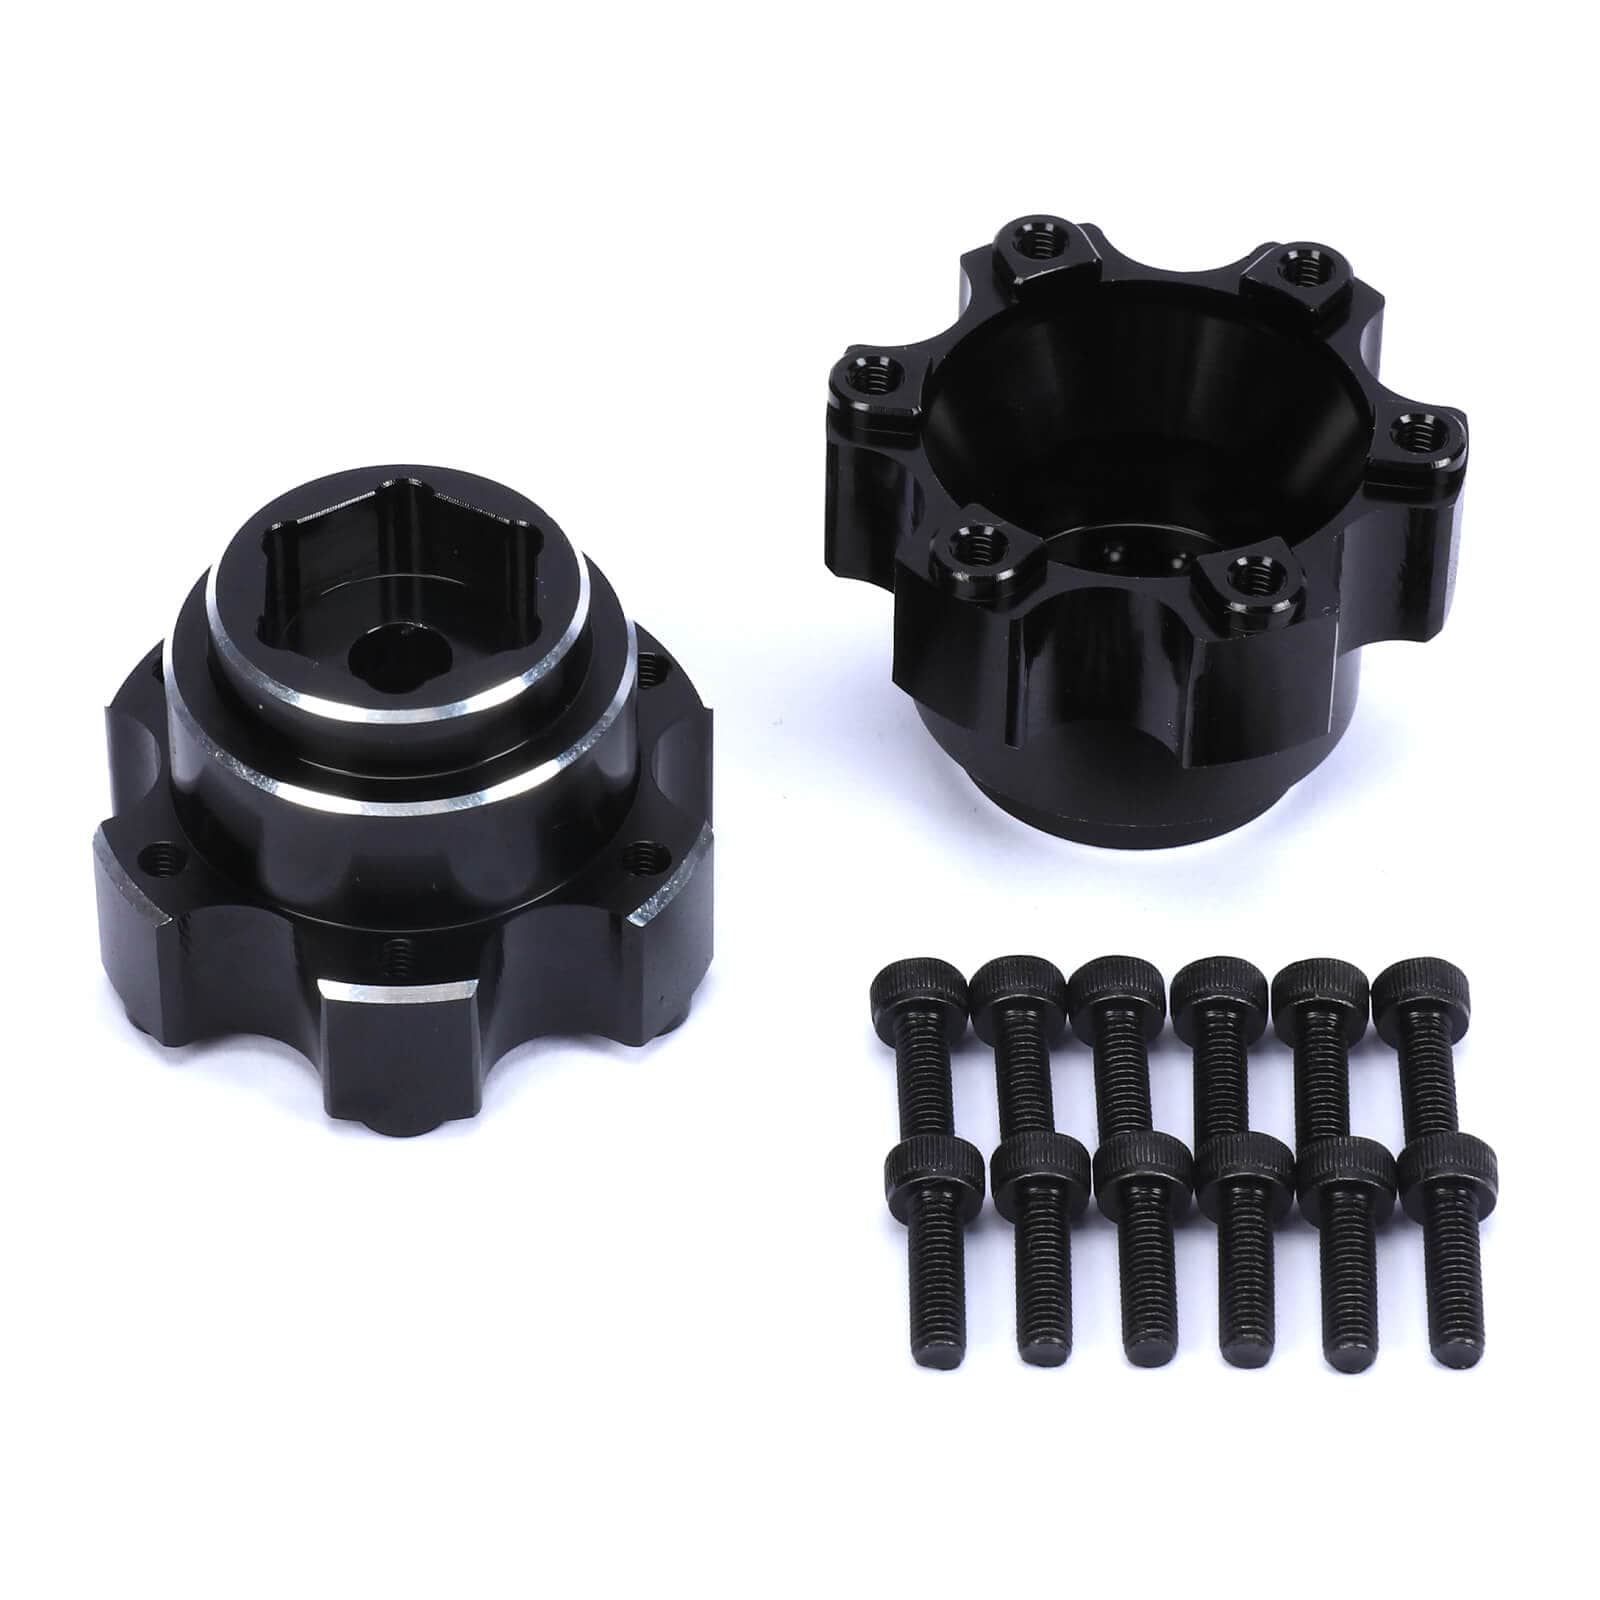 RCAWD UNIHEX UNIHEX 1/10 6x30 to 14mm Aluminum Hex Adapters for Pro-line 6x30 Removable Hex Wheels Black